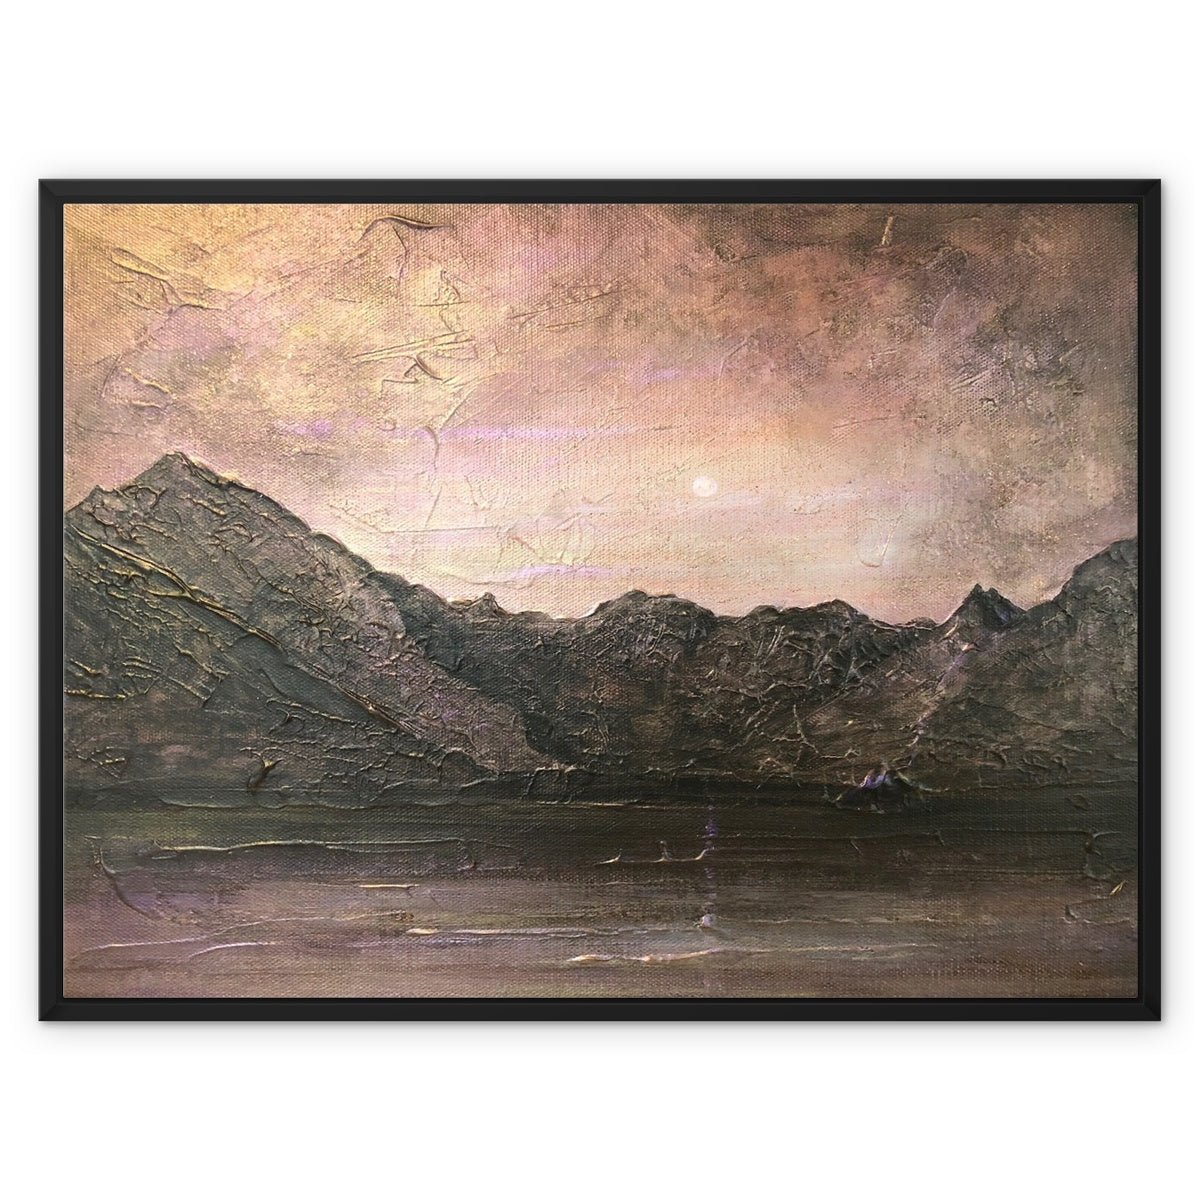 Dubh Ridge Moonlight Skye Painting | Framed Canvas From Scotland-Floating Framed Canvas Prints-Skye Art Gallery-32"x24"-Black Frame-Paintings, Prints, Homeware, Art Gifts From Scotland By Scottish Artist Kevin Hunter